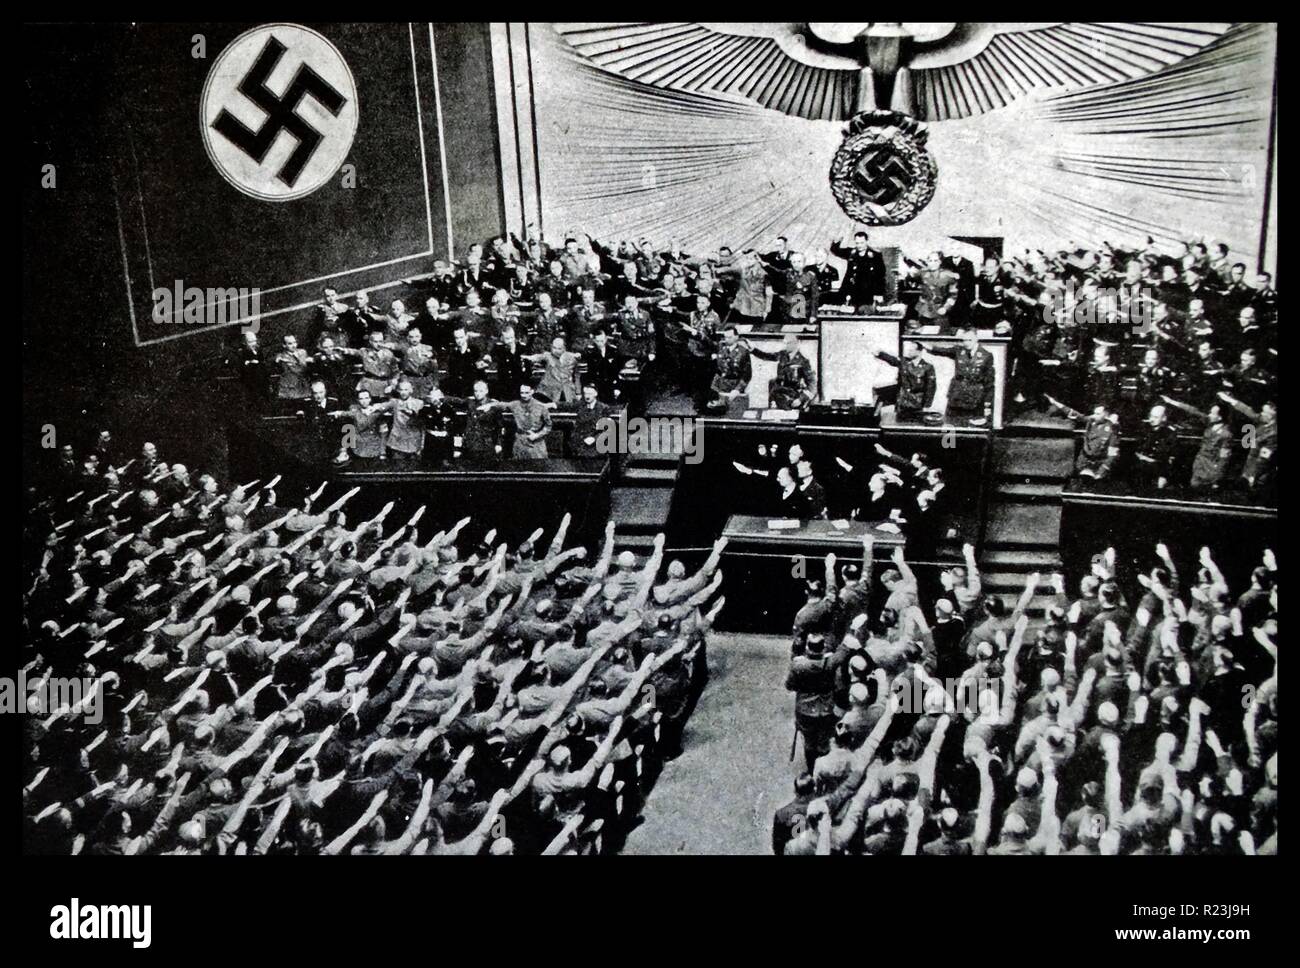 Photograph of a Reichstag Rally from the Kroll Opera House, in Berlin. Hitler addresses the Reichstag putting forward proposal for peace which was denounced by M. Daladier. Hitler is shown in the front row with Hess and Ribbentrop next to him. Dated 1939 Stock Photo